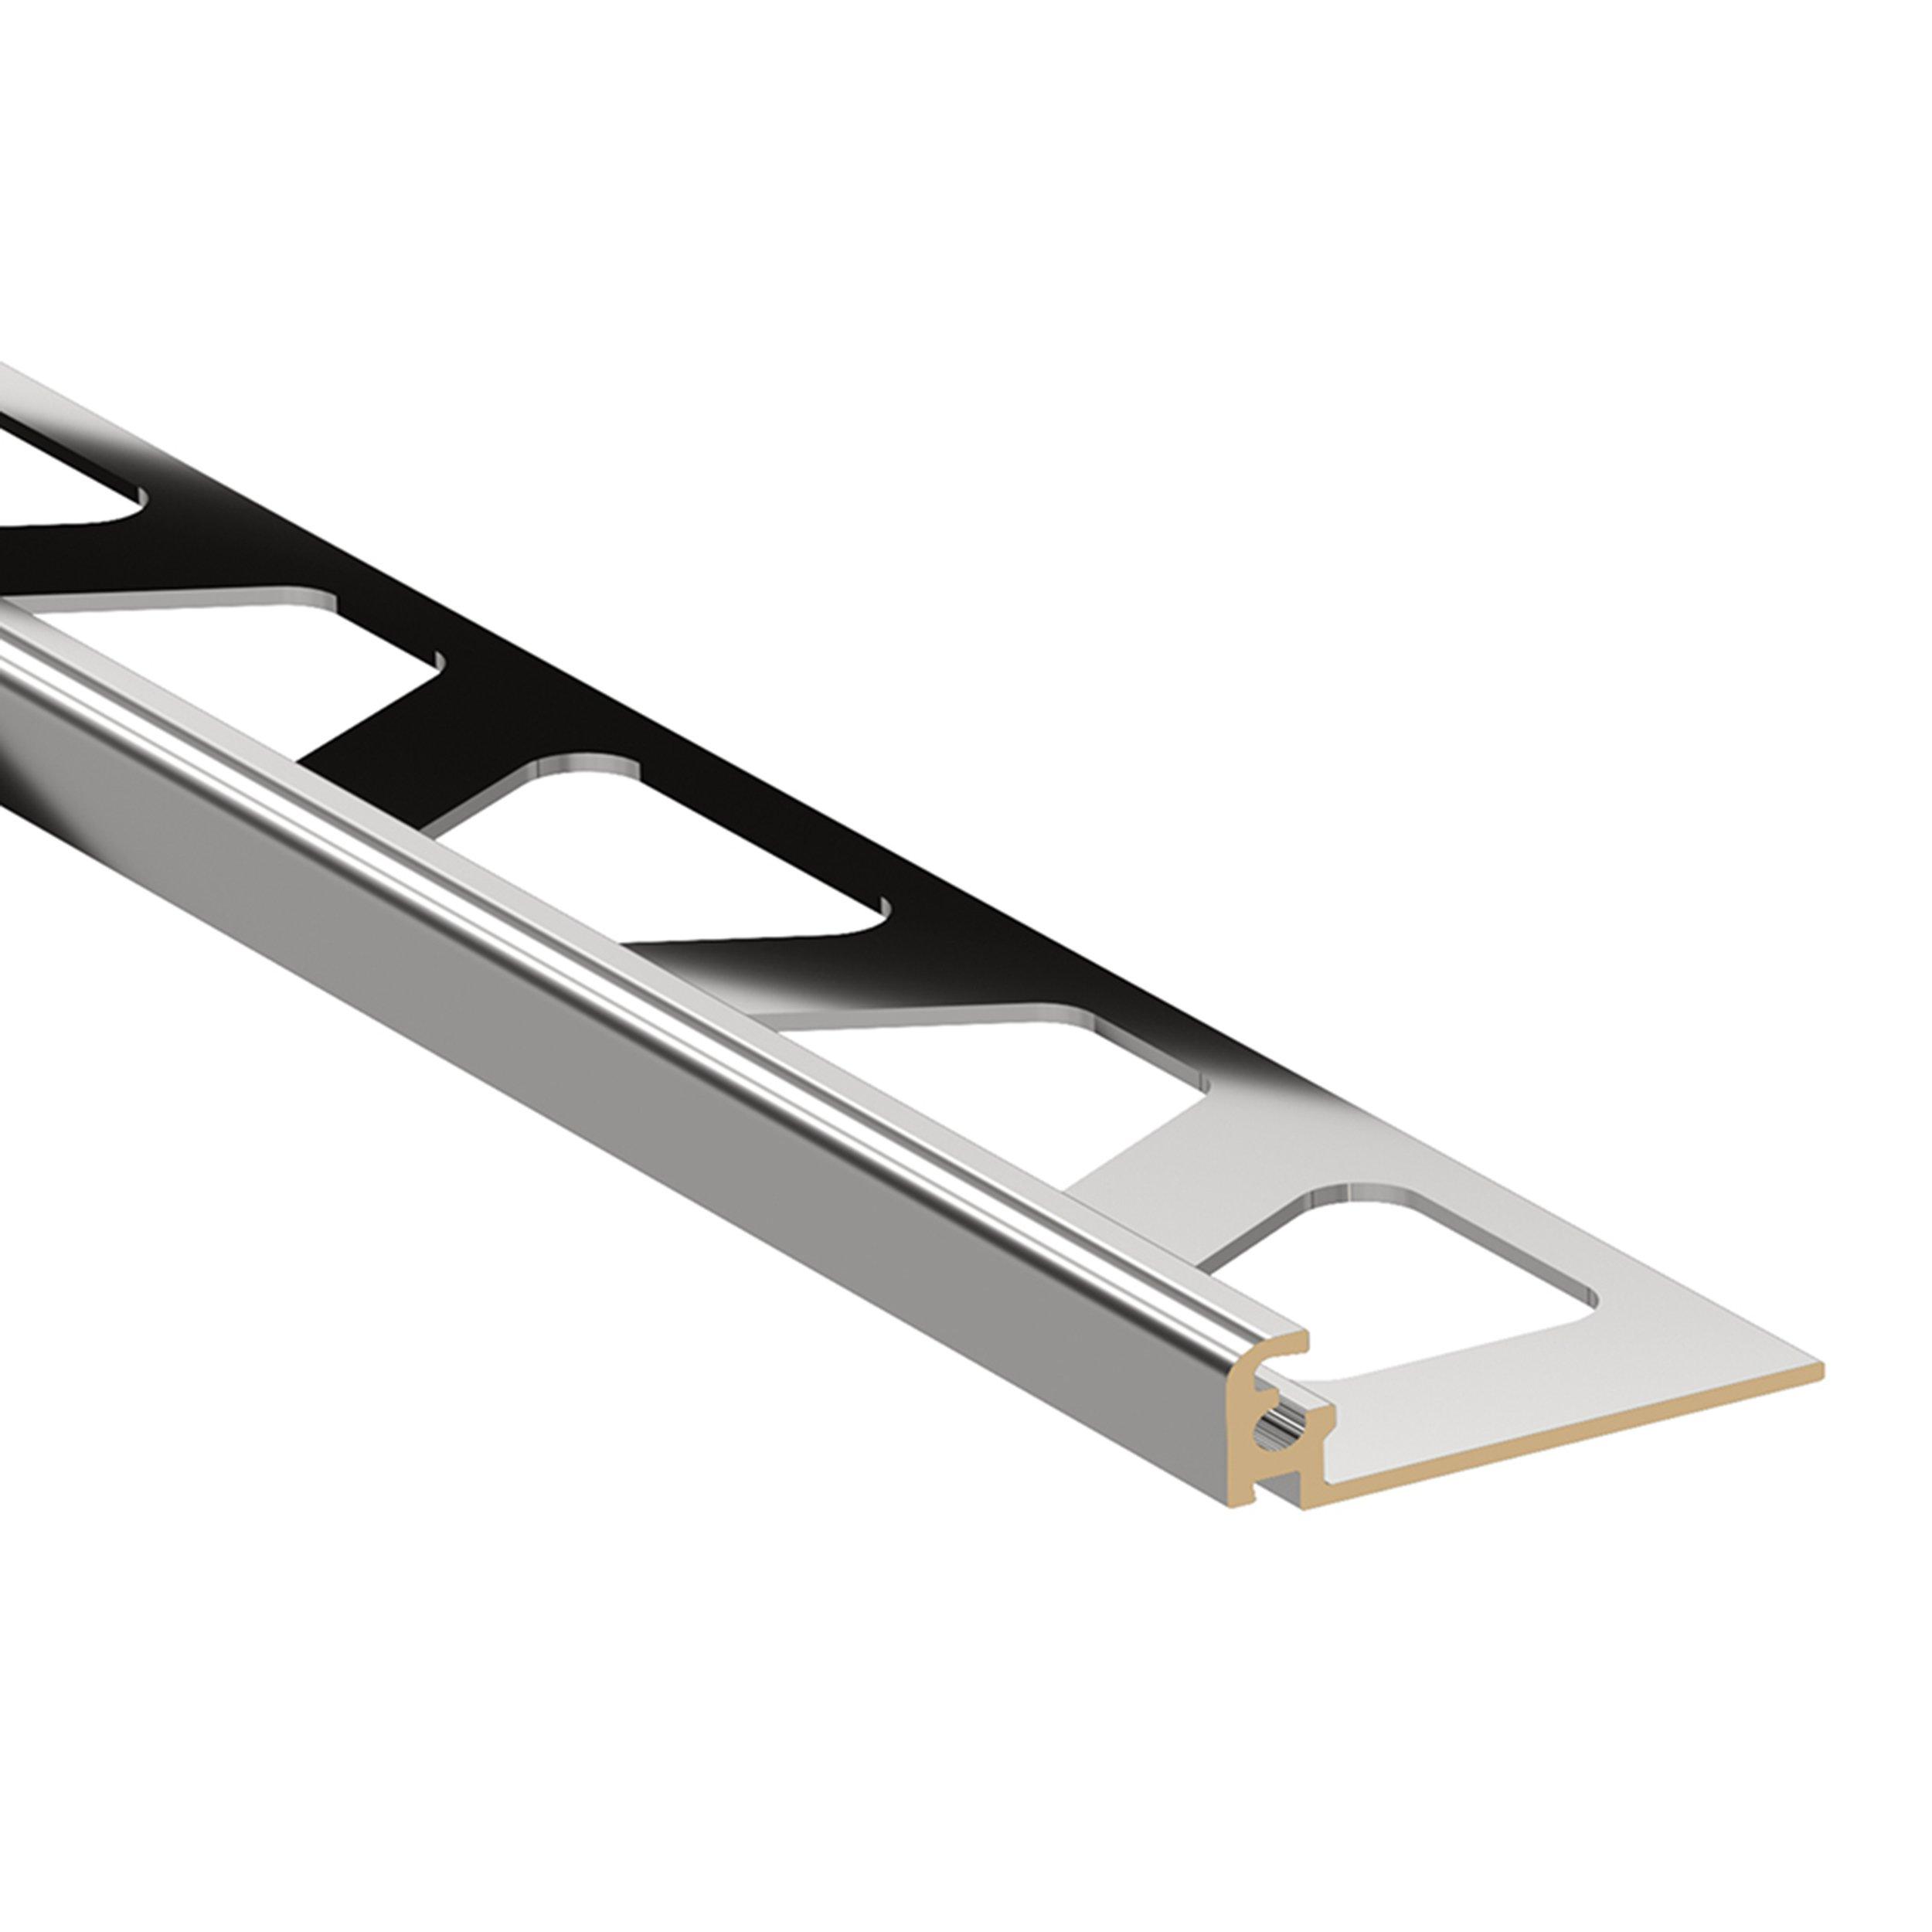 Schluter Jolly Edge Trim 5/16in. Aluminum Chrome-Plated Solid Brass